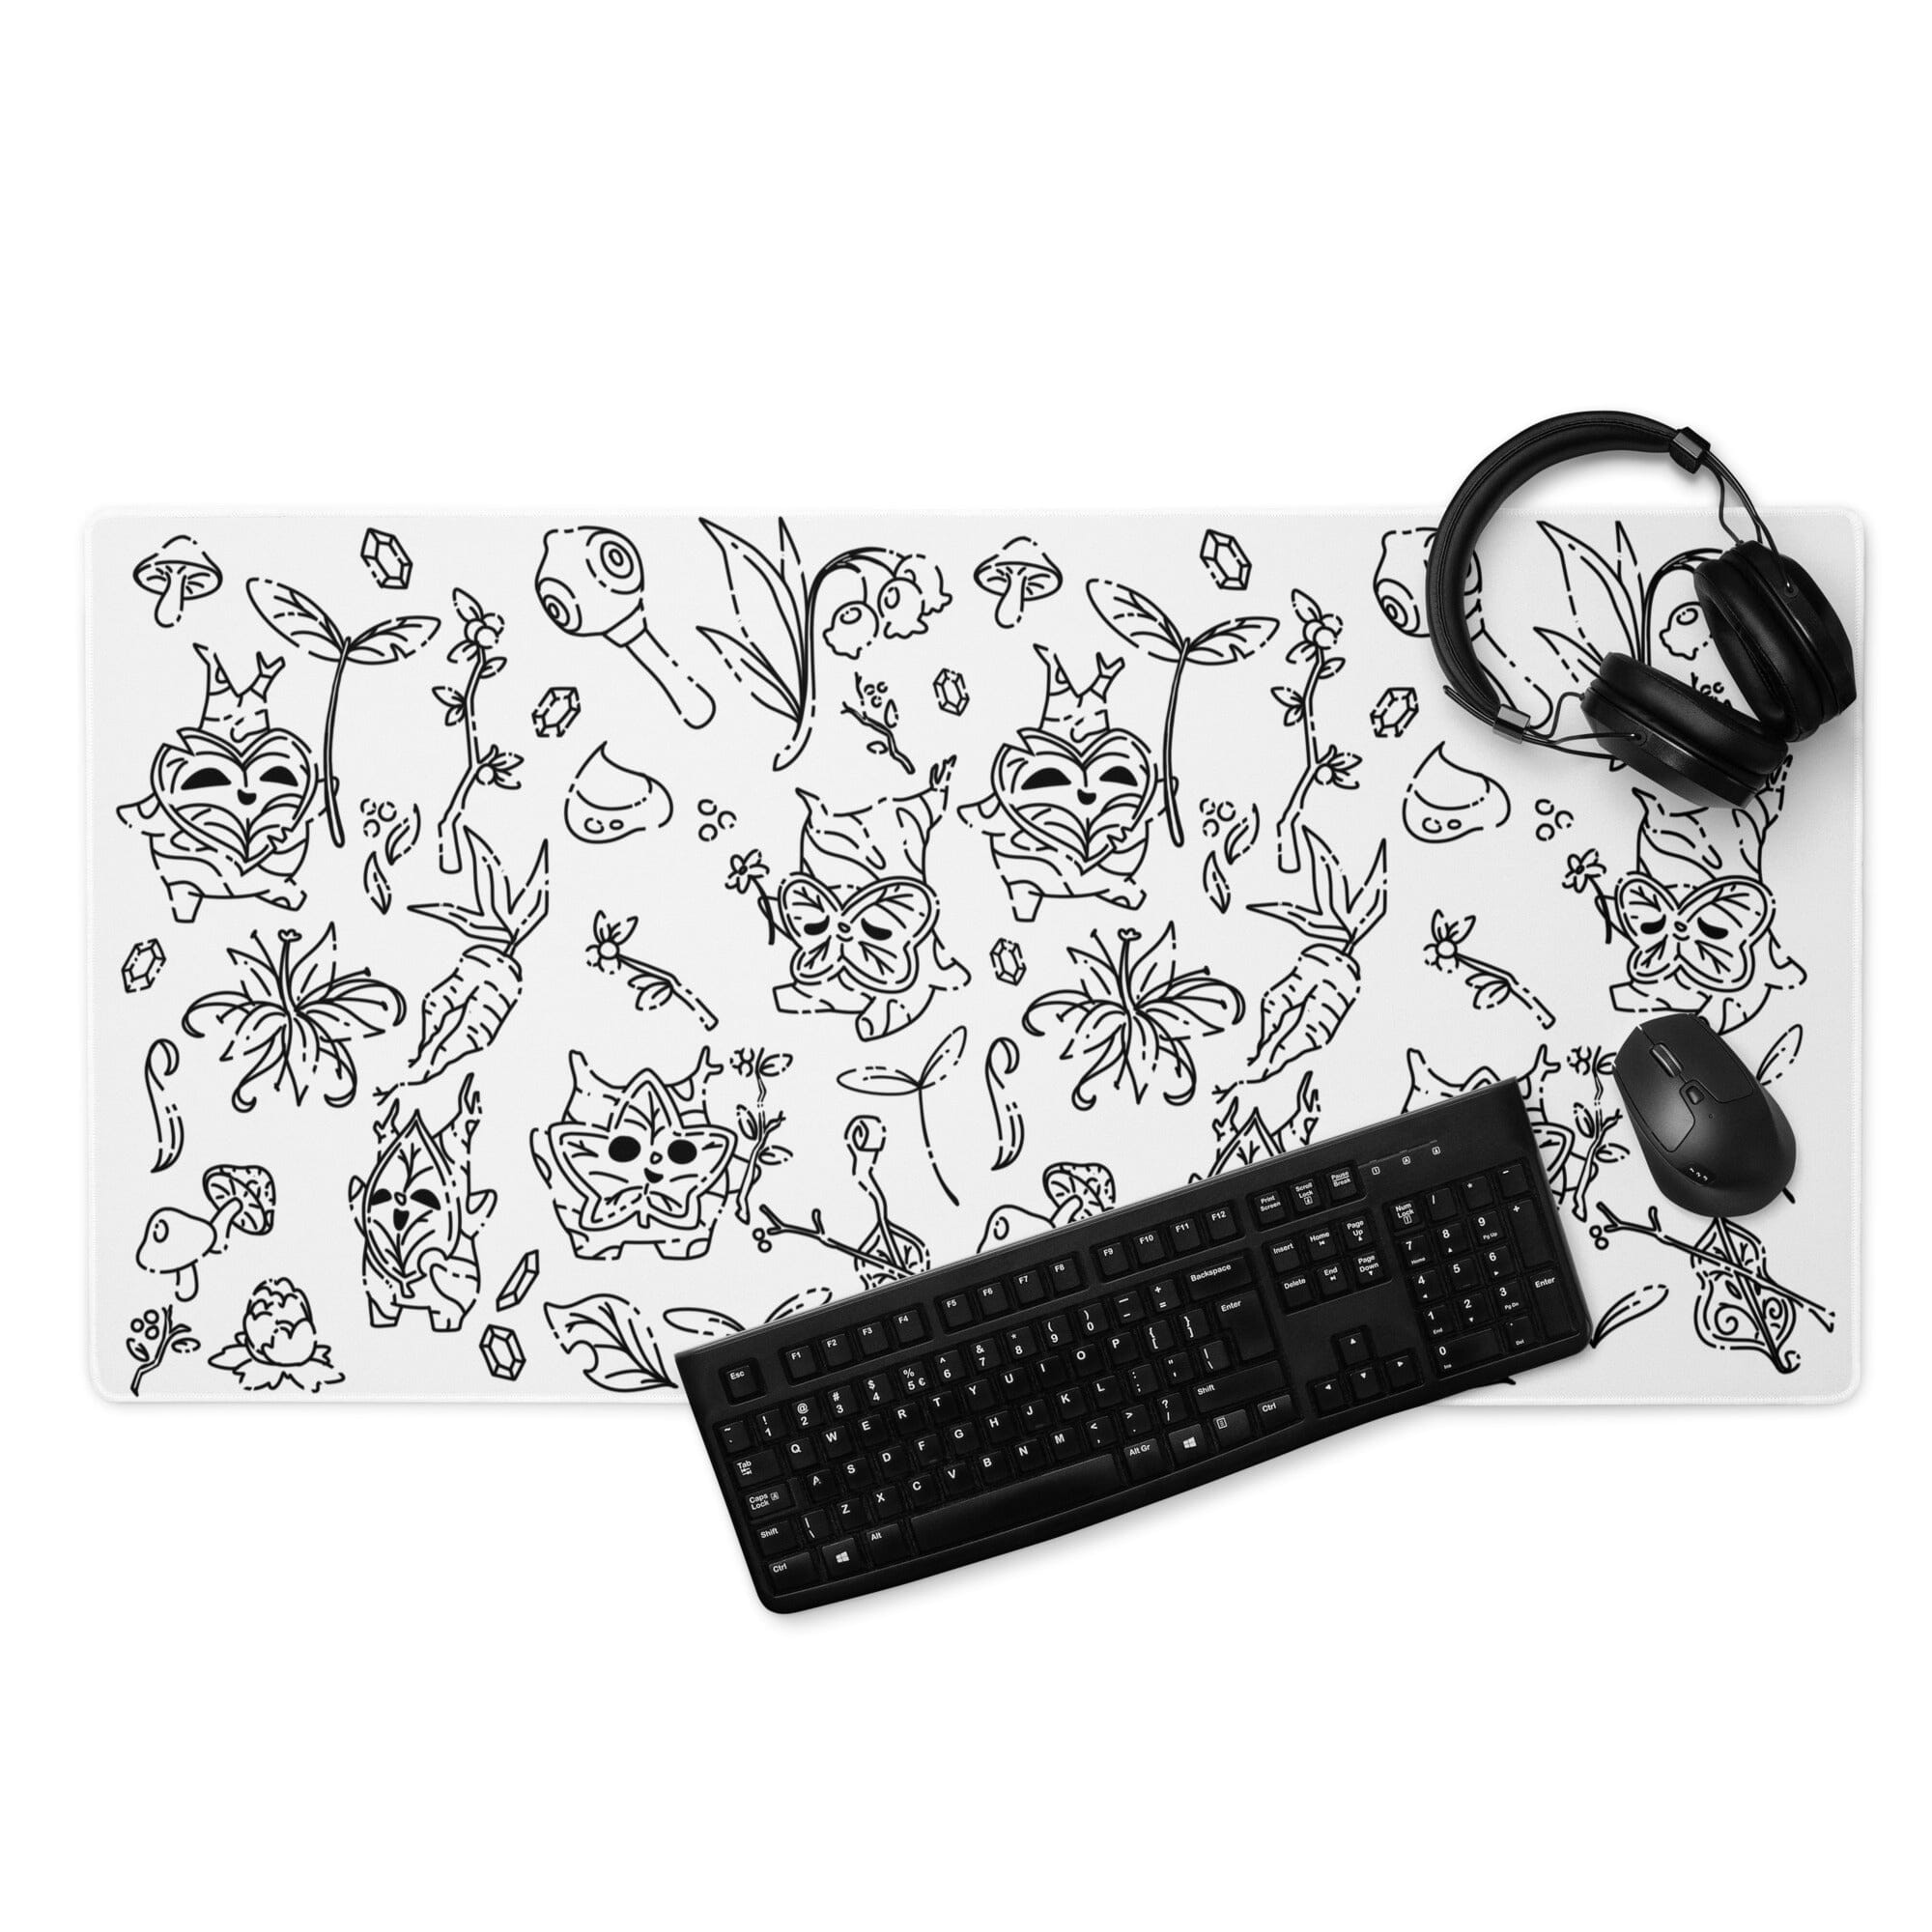 The Koroks | Gaming mouse pad | The Legend of Zelda Threads & Thistles Inventory 36″×18″ 